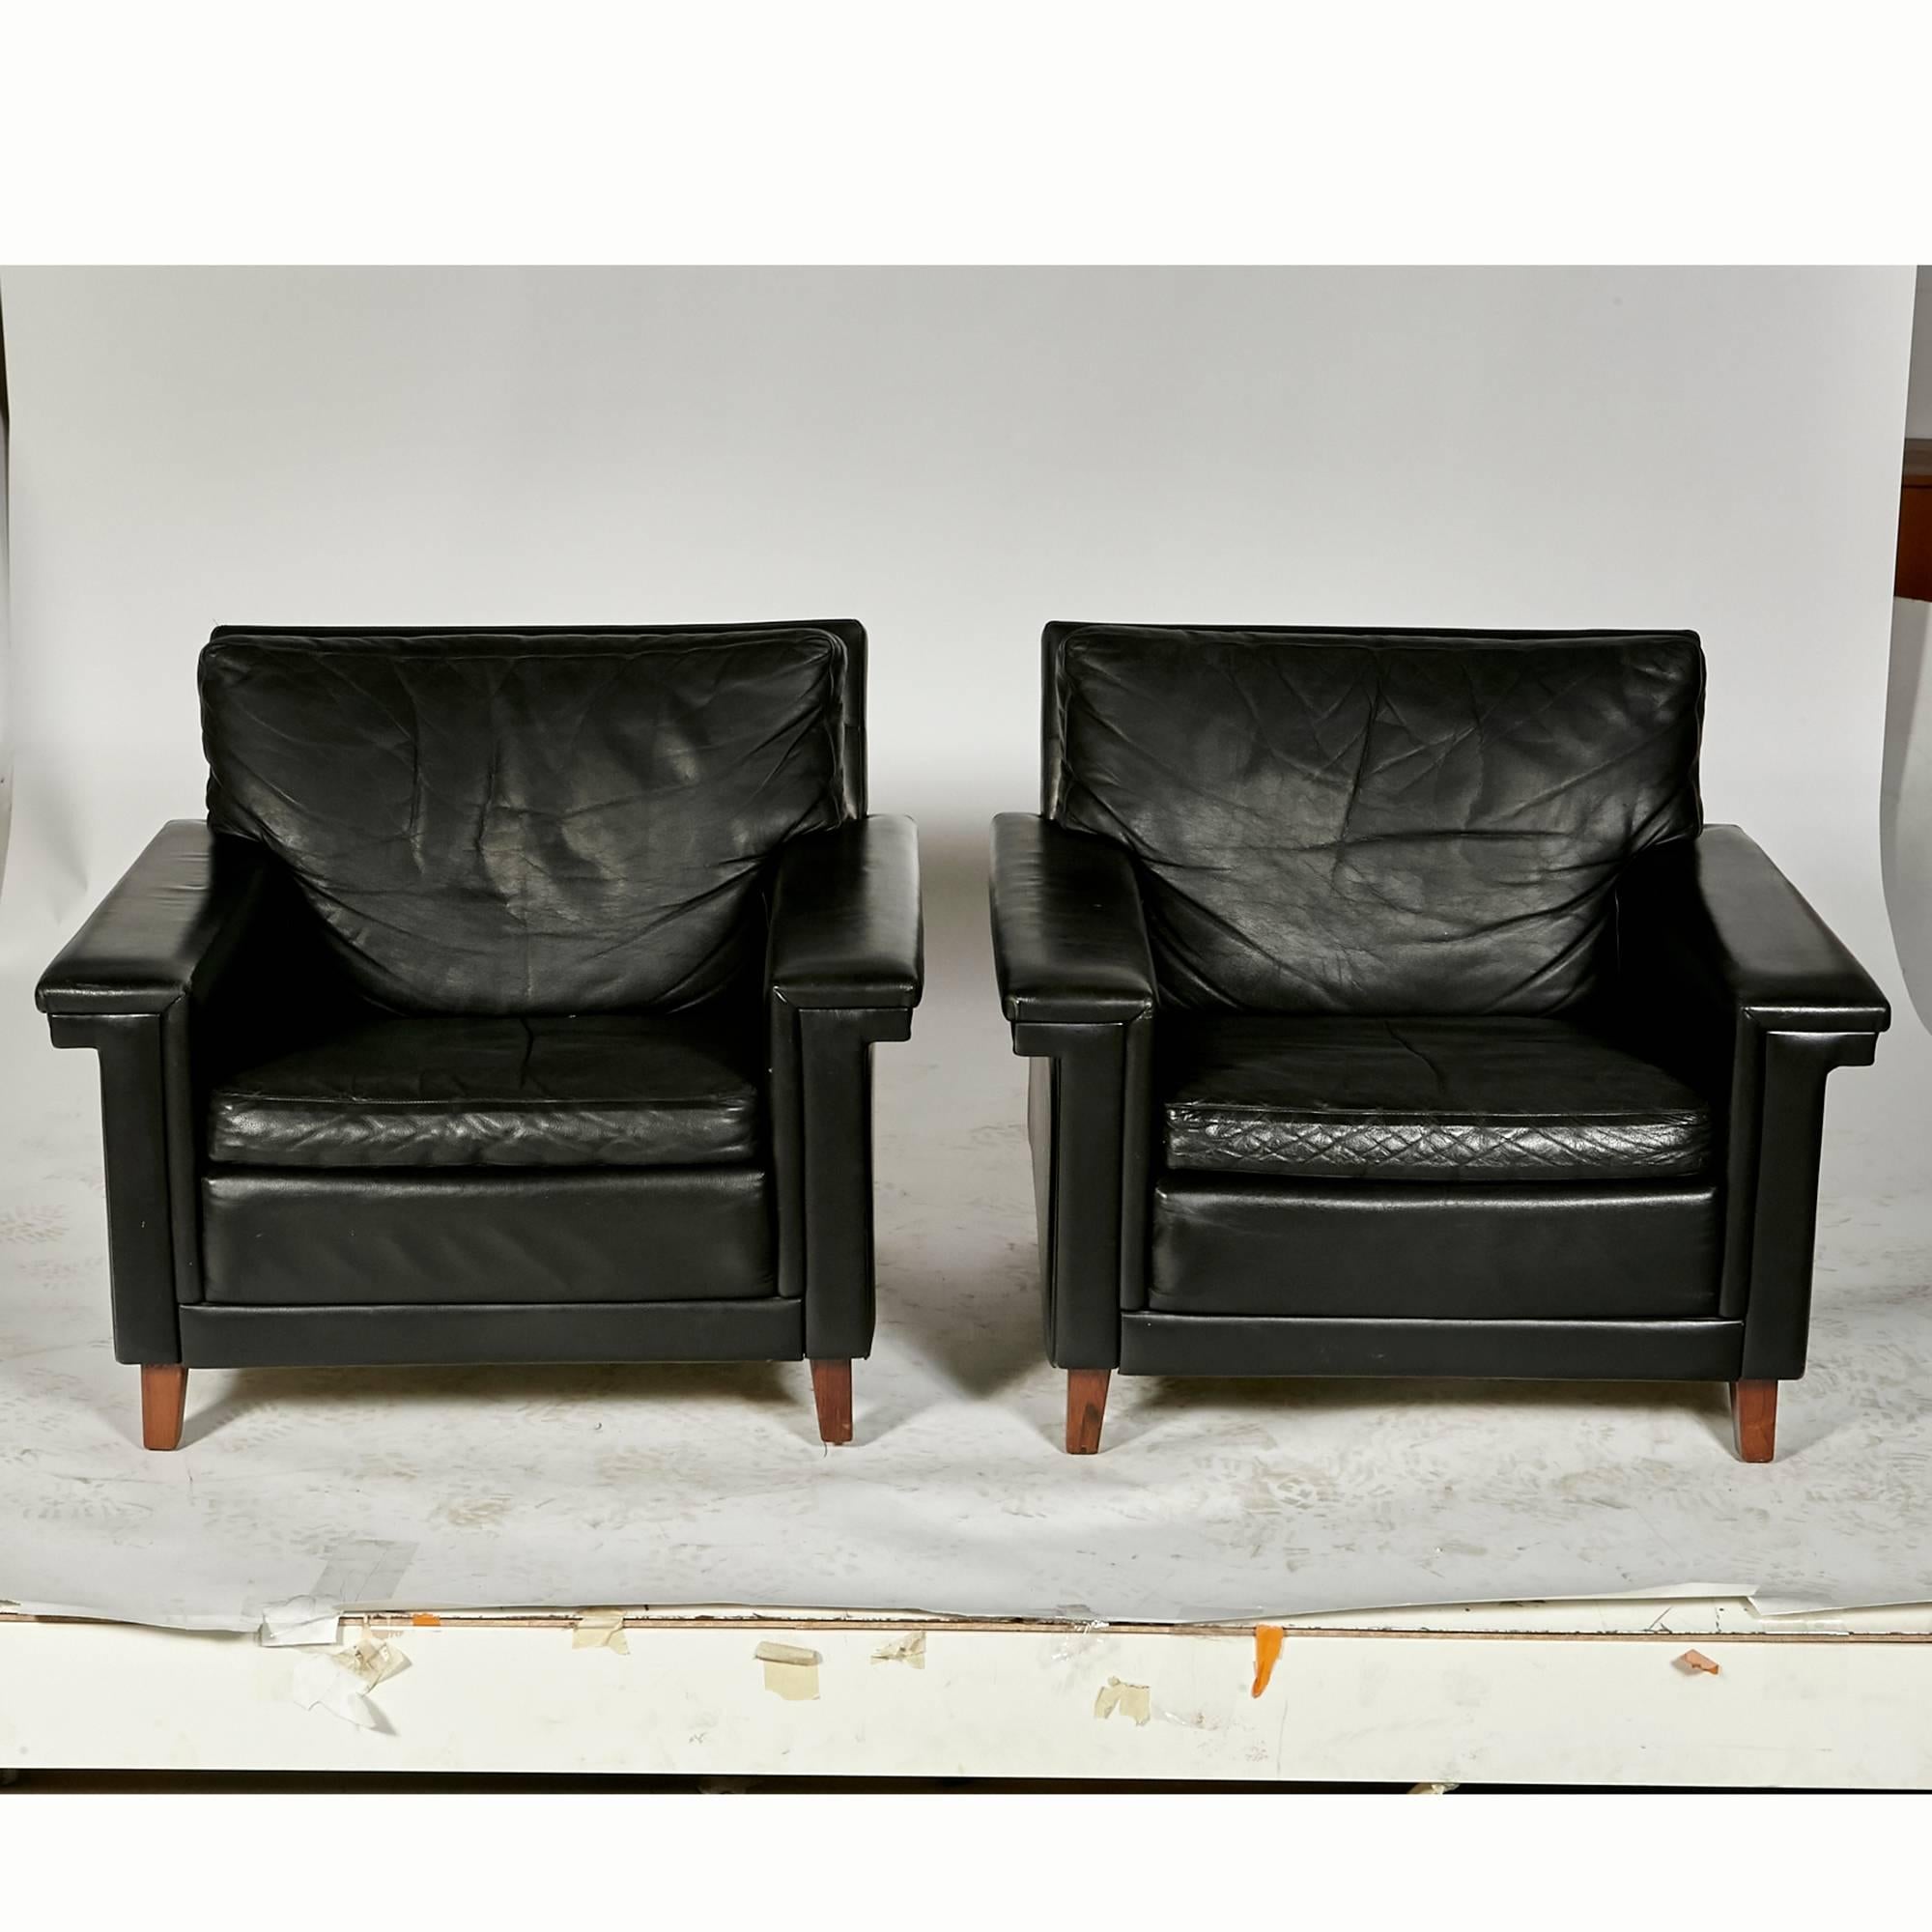 Scandinavian Modern 1960s Pair of Black Leather Lounge Chairs, Denmark For Sale